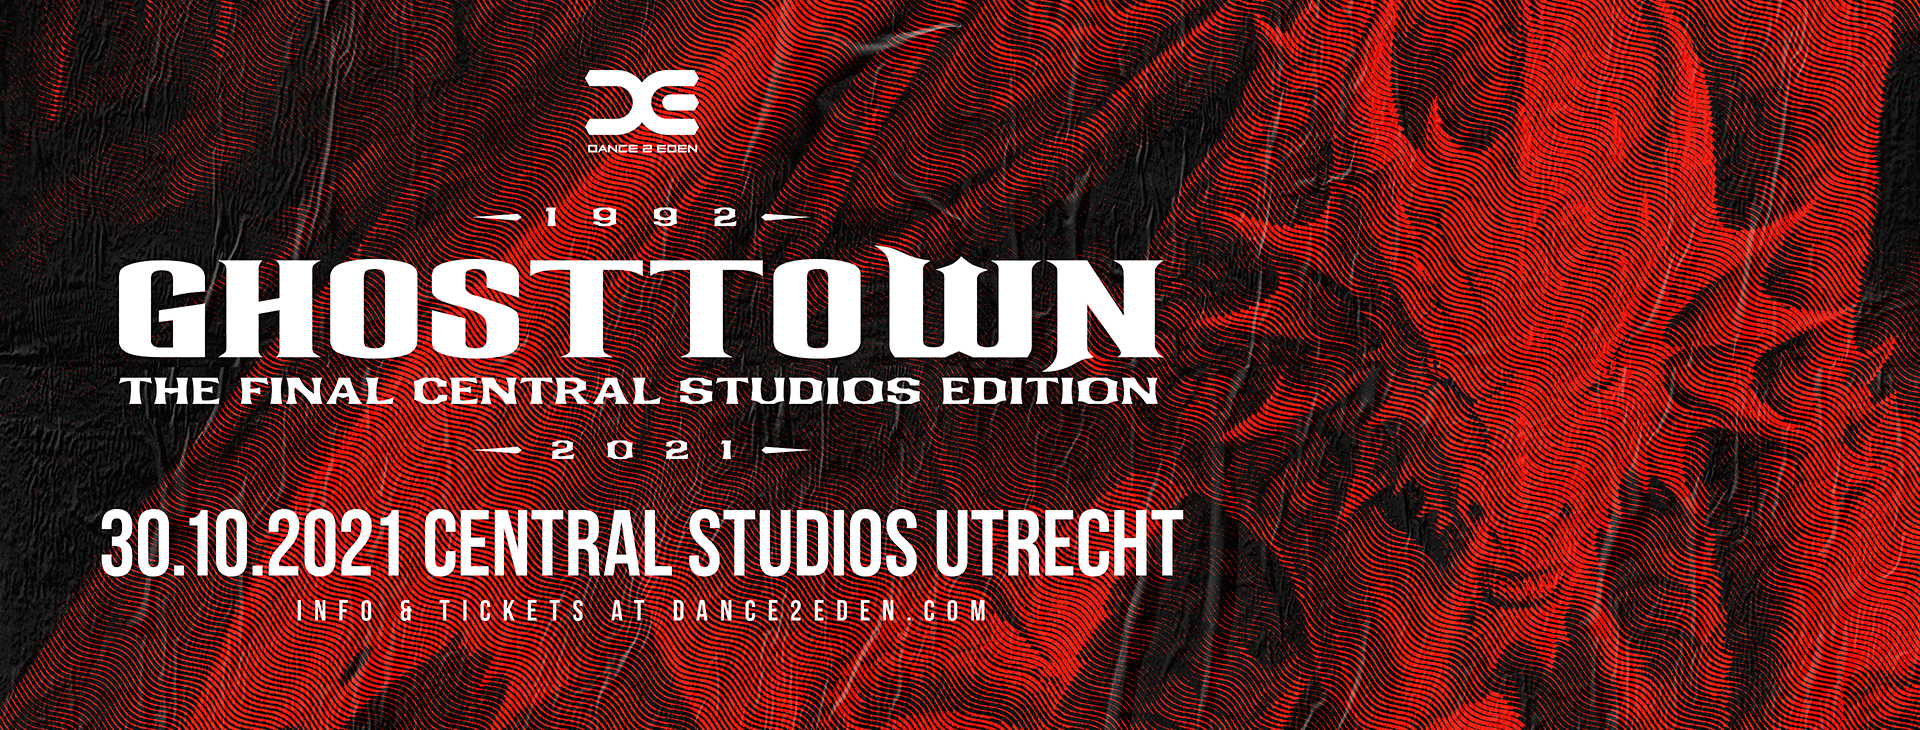 Ghosttown | The Final Central Studios Edition